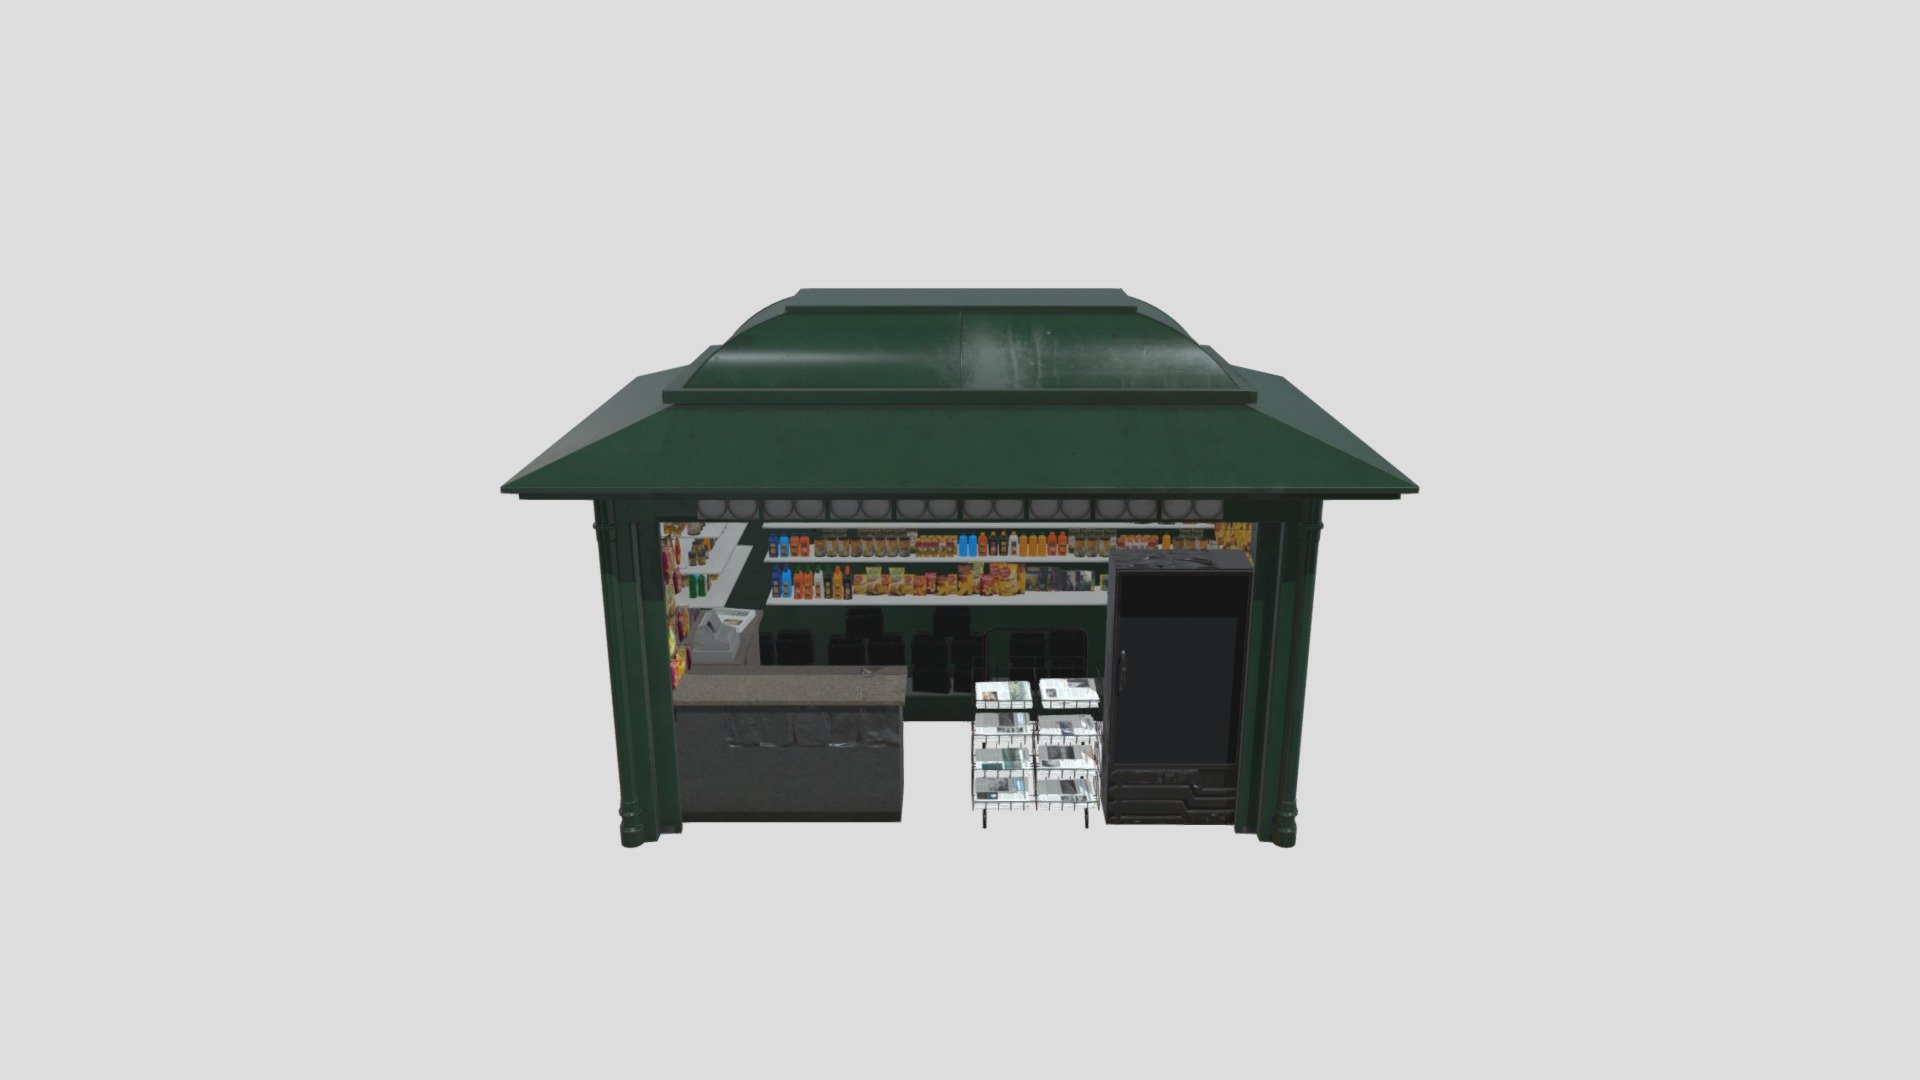 Professional, high quality 3d model of kiosk ready to use in your visualizations with textures and materials included 3d model